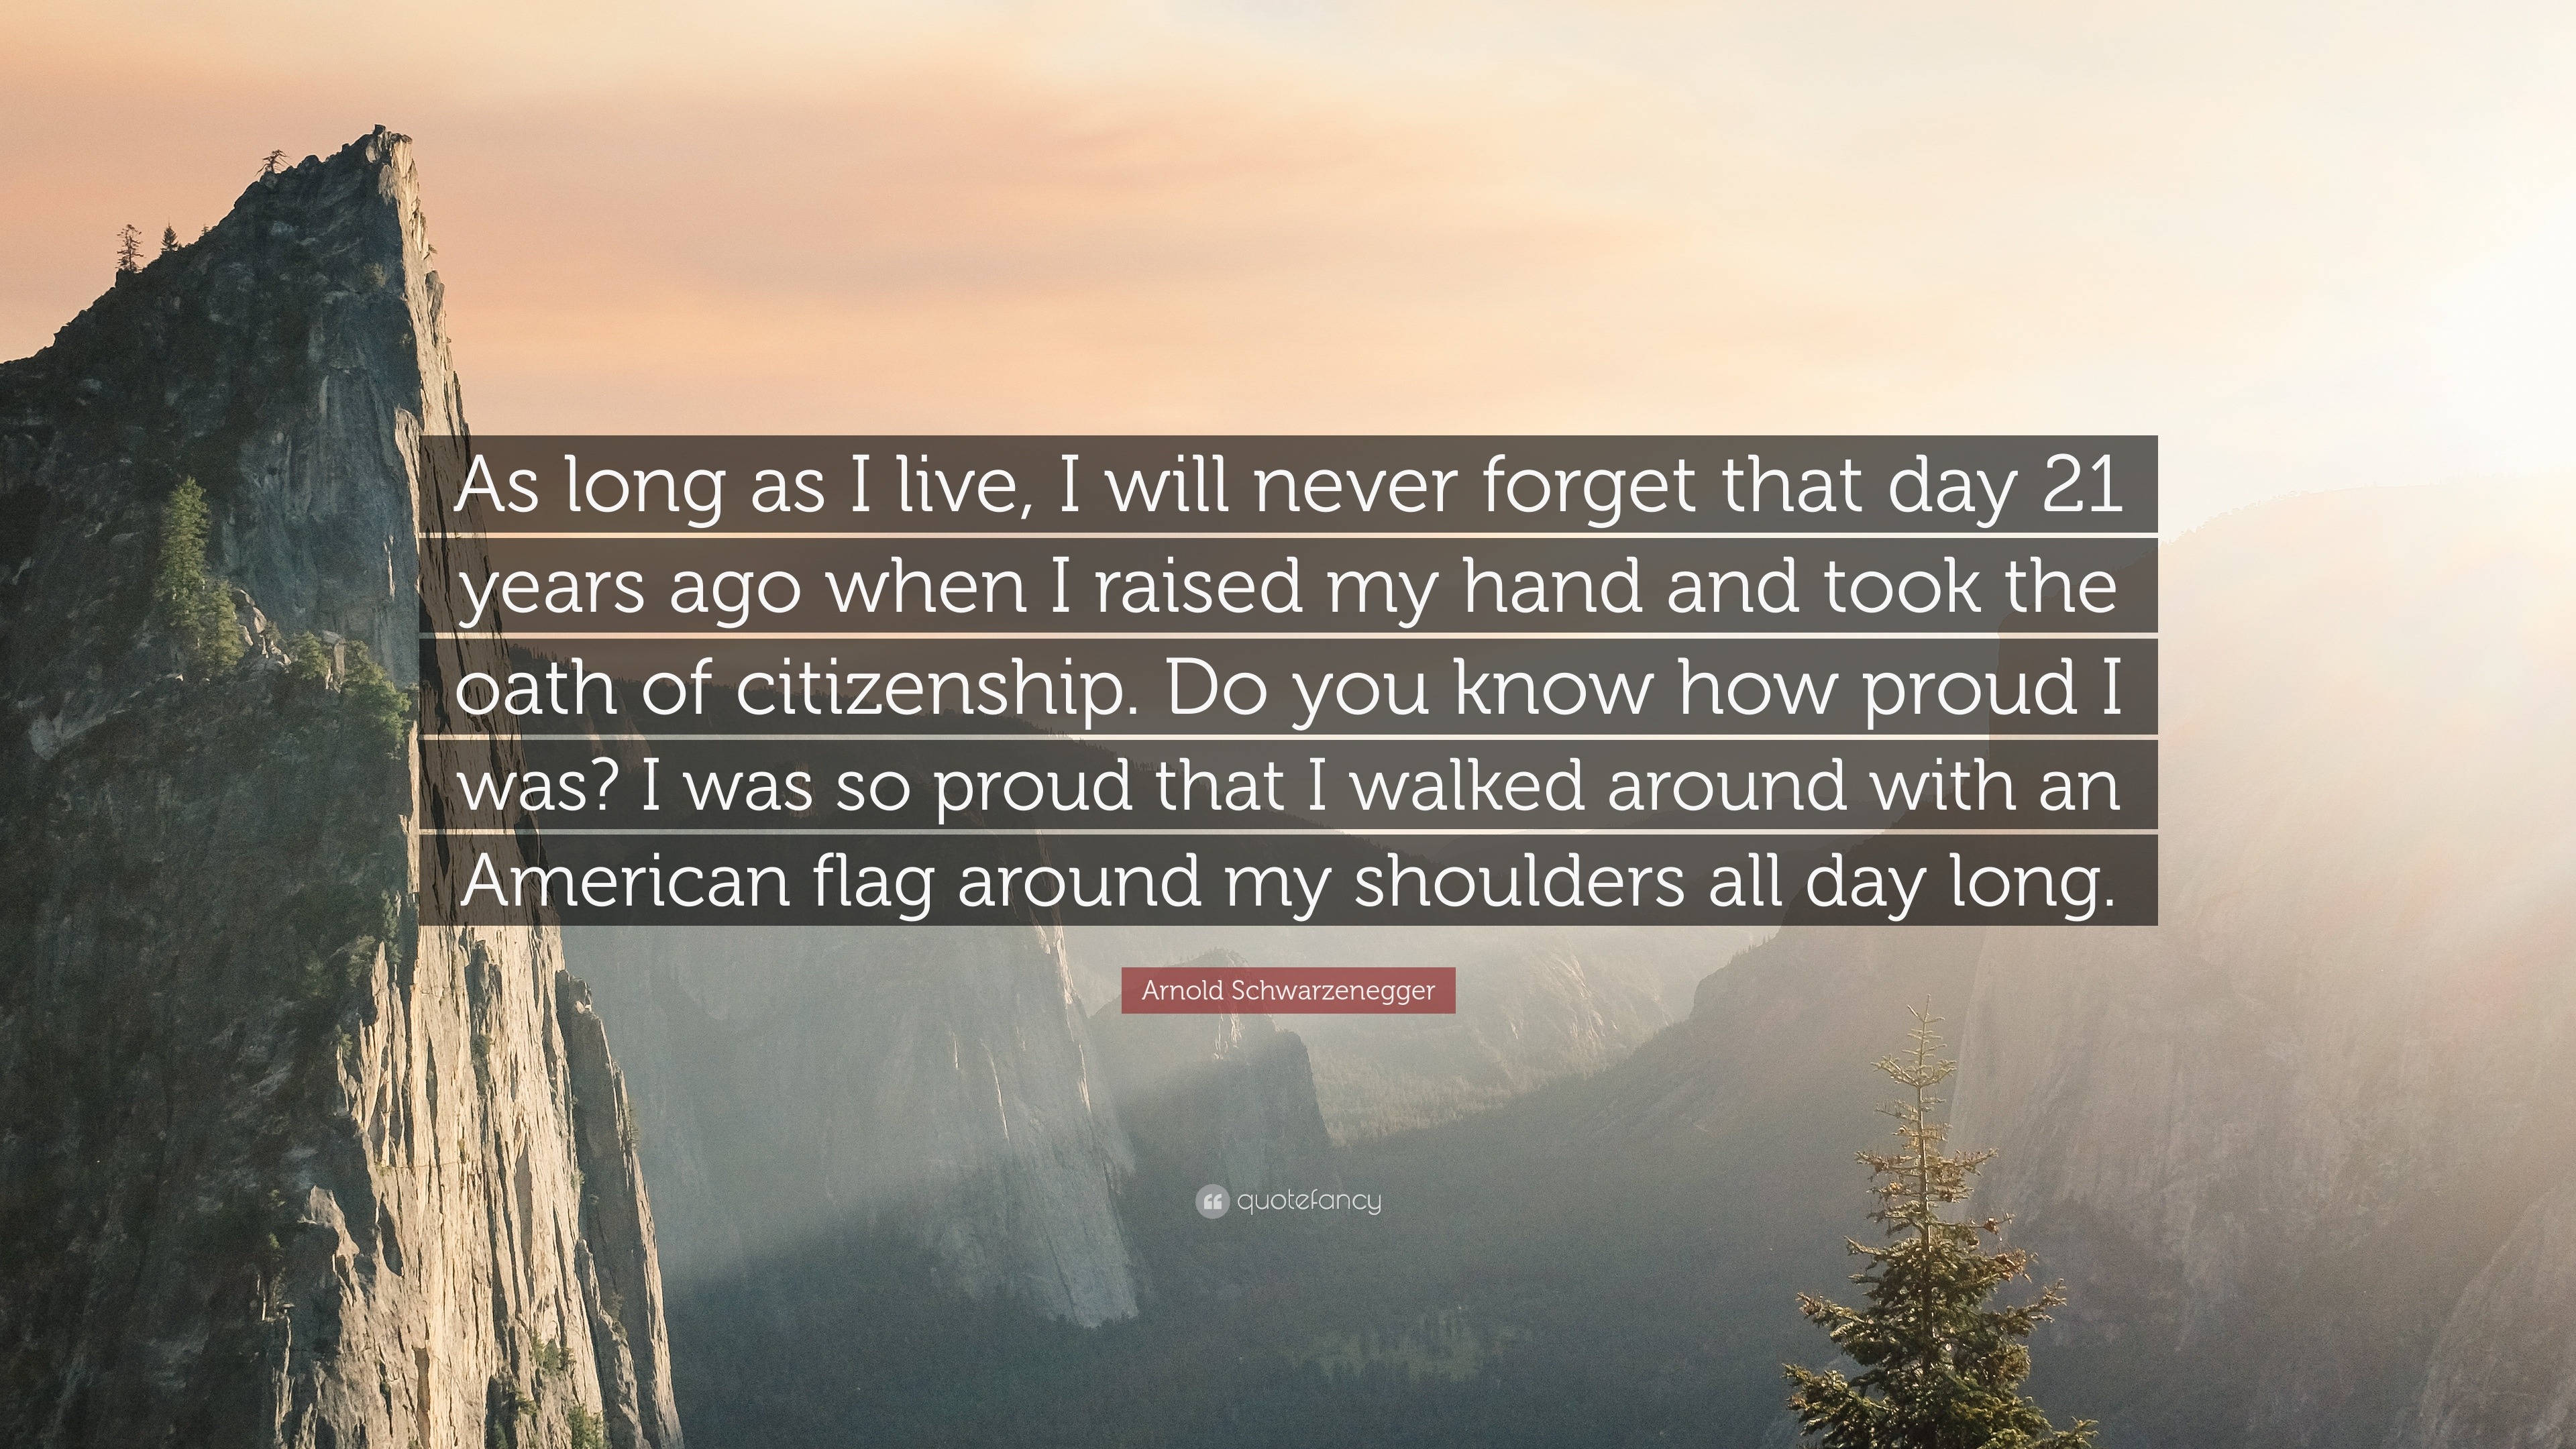 Arnold Schwarzenegger Quote As Long As I Live I Will Never Forget That Day 21 Years Ago When I Raised My Hand And Took The Oath Of Citizenship Do